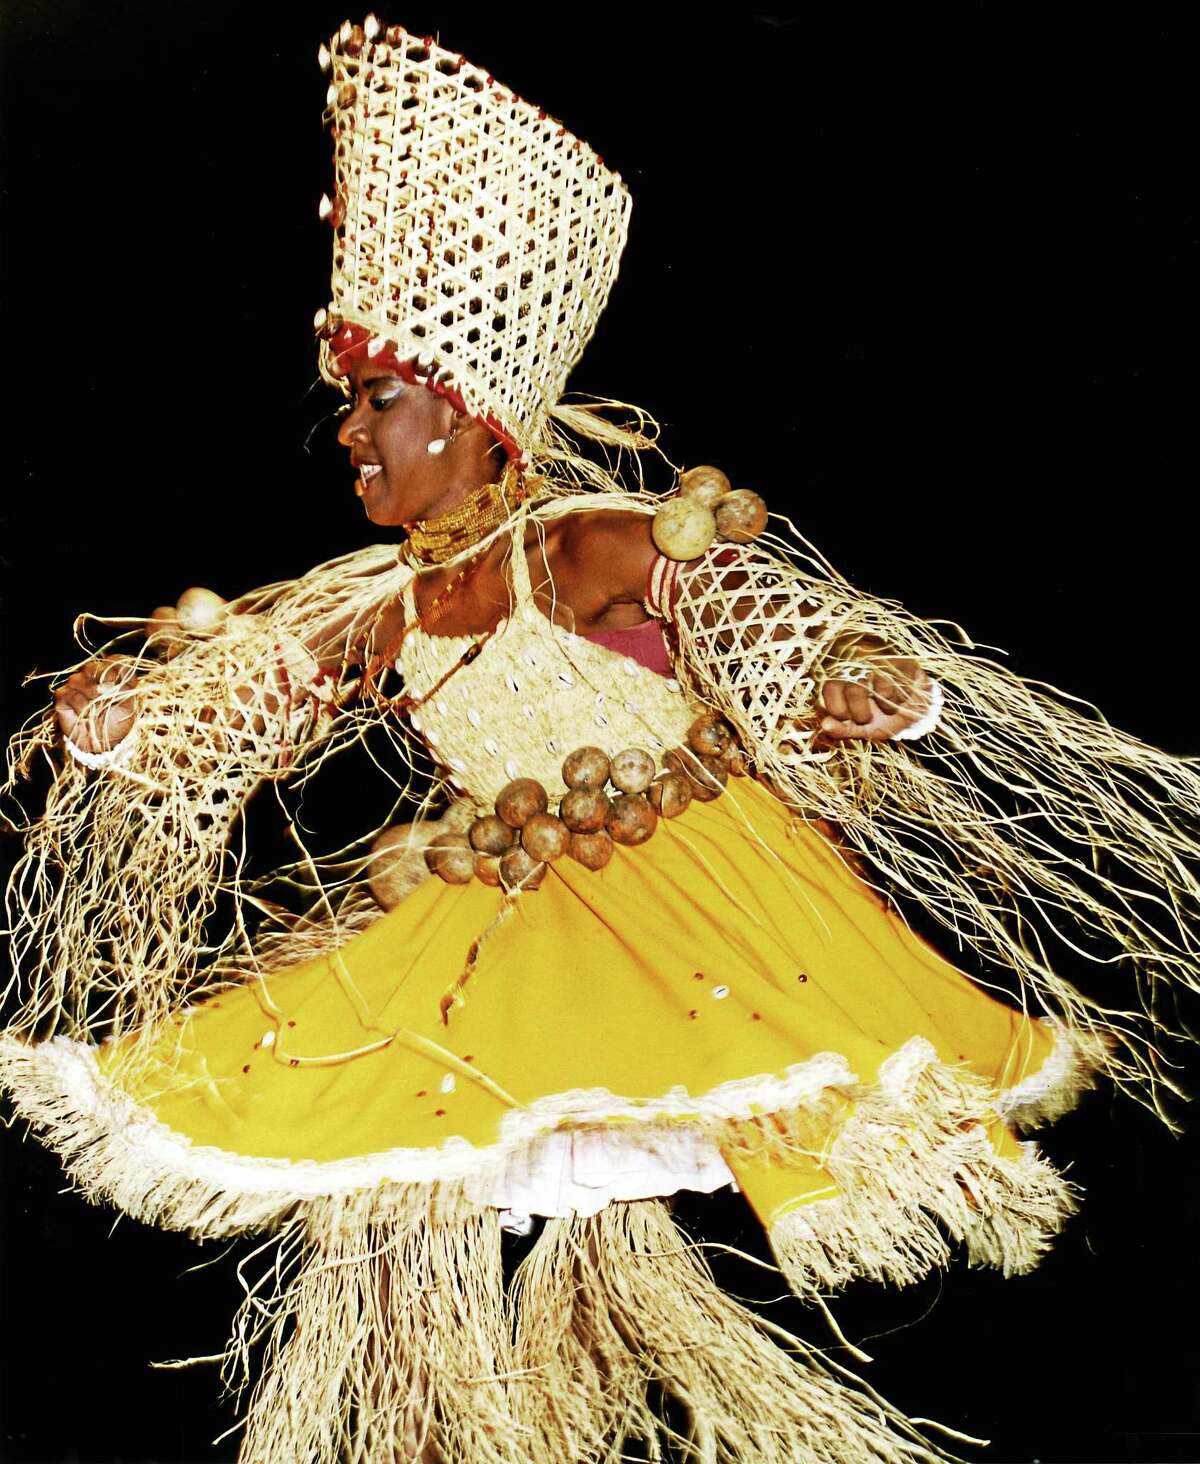 LIFFY The 20-minute documentary "Ebony Goddess" will be shown at 1:30 p.m. Saturday with "Festive Land," which looks at the week-long Carnival that brings more than two million people to the streets of Salvador, Bahia, Brazil.